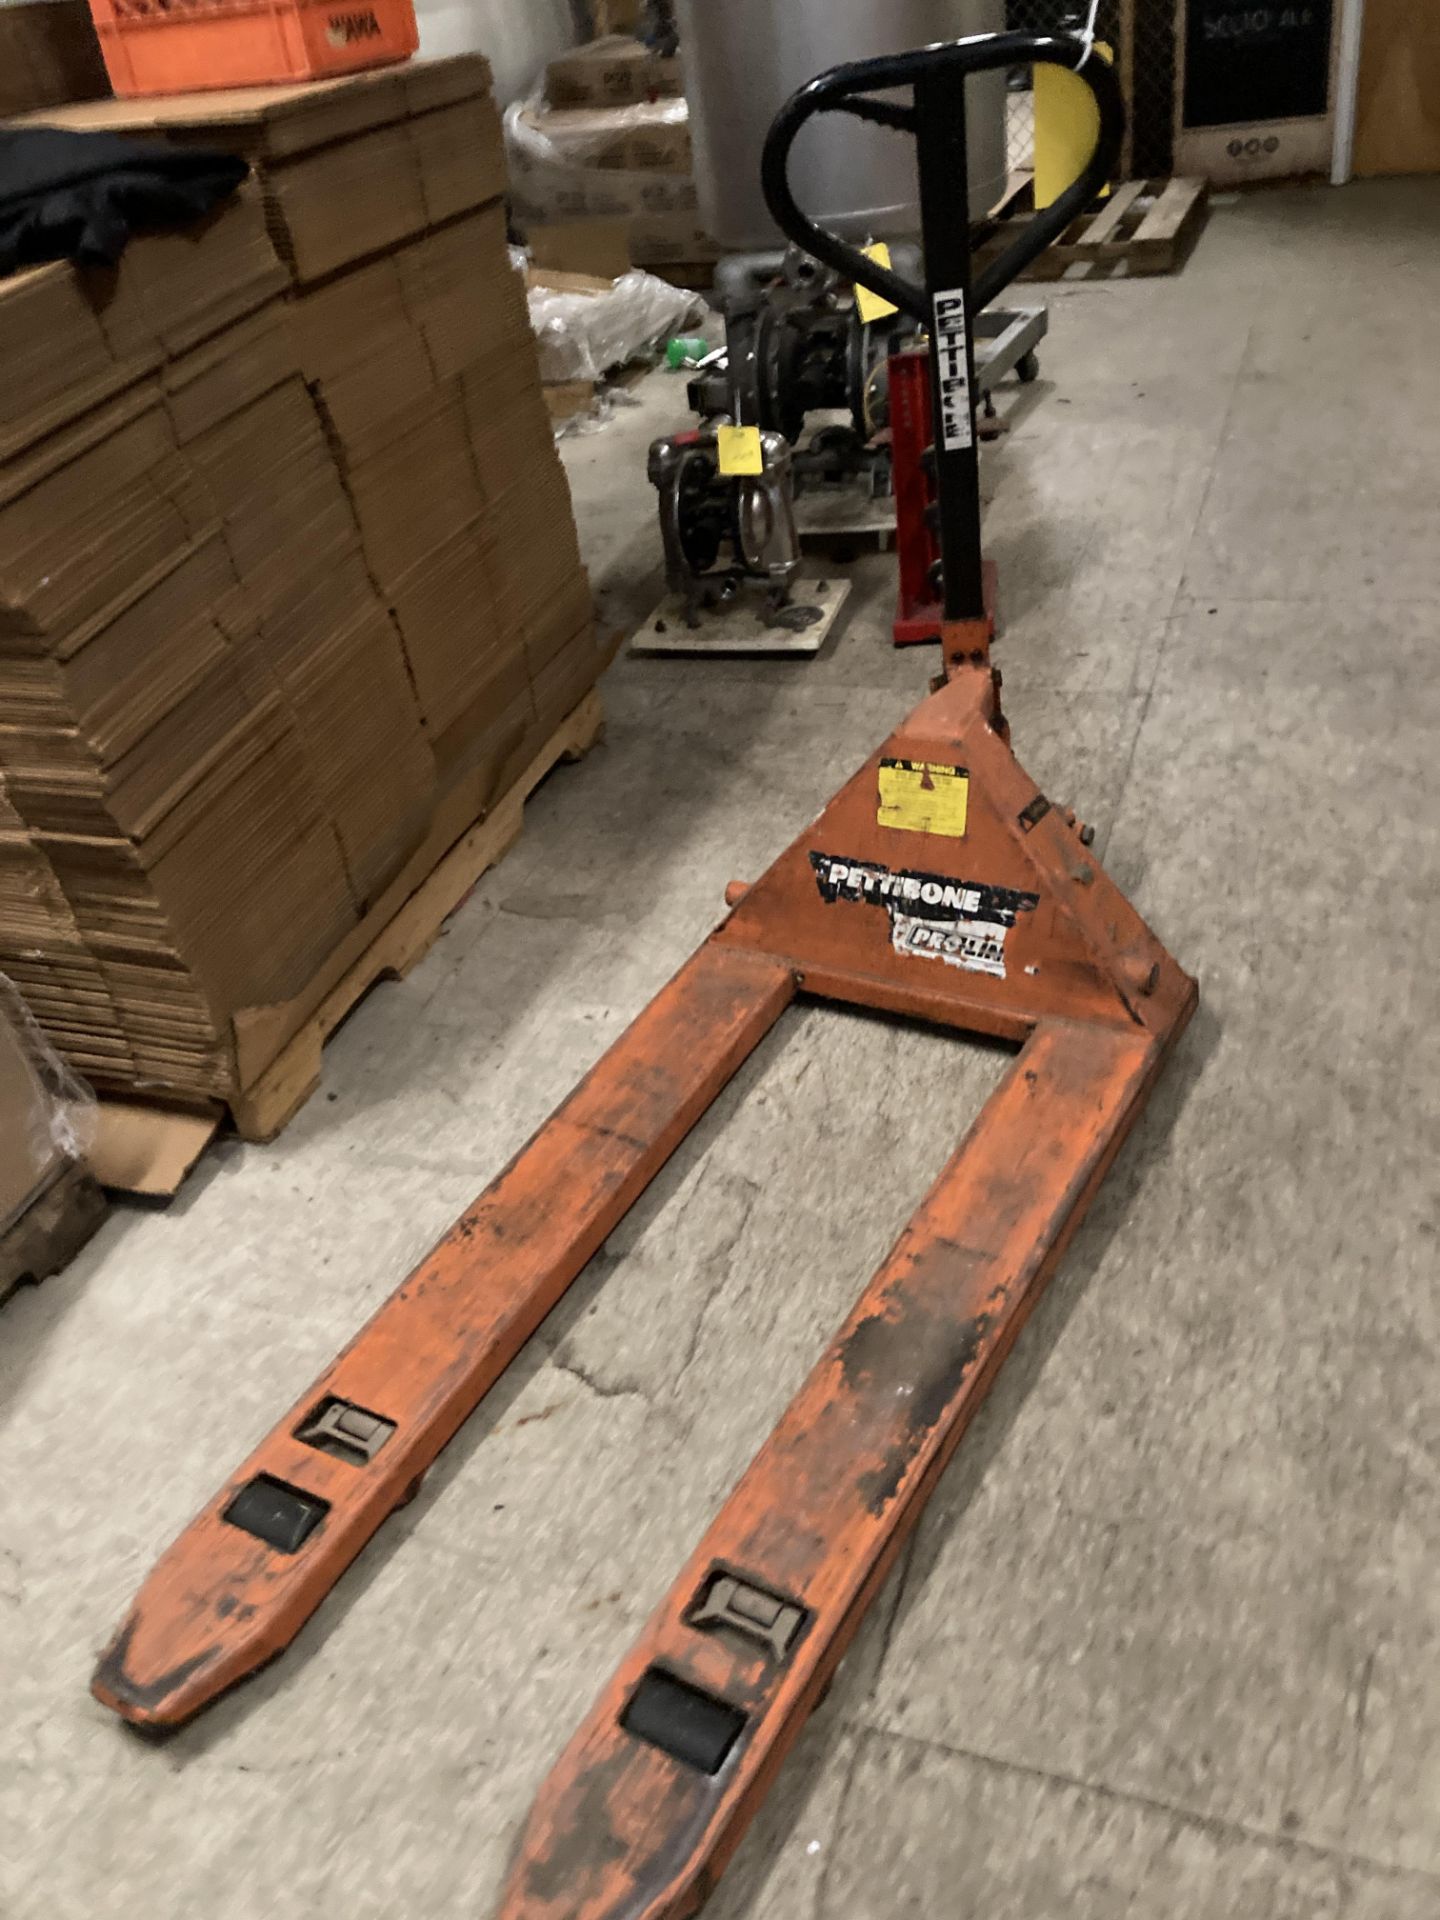 Pettibone pallet jack ***Rigging and Loading Fee of $25 will be automatically added to winning